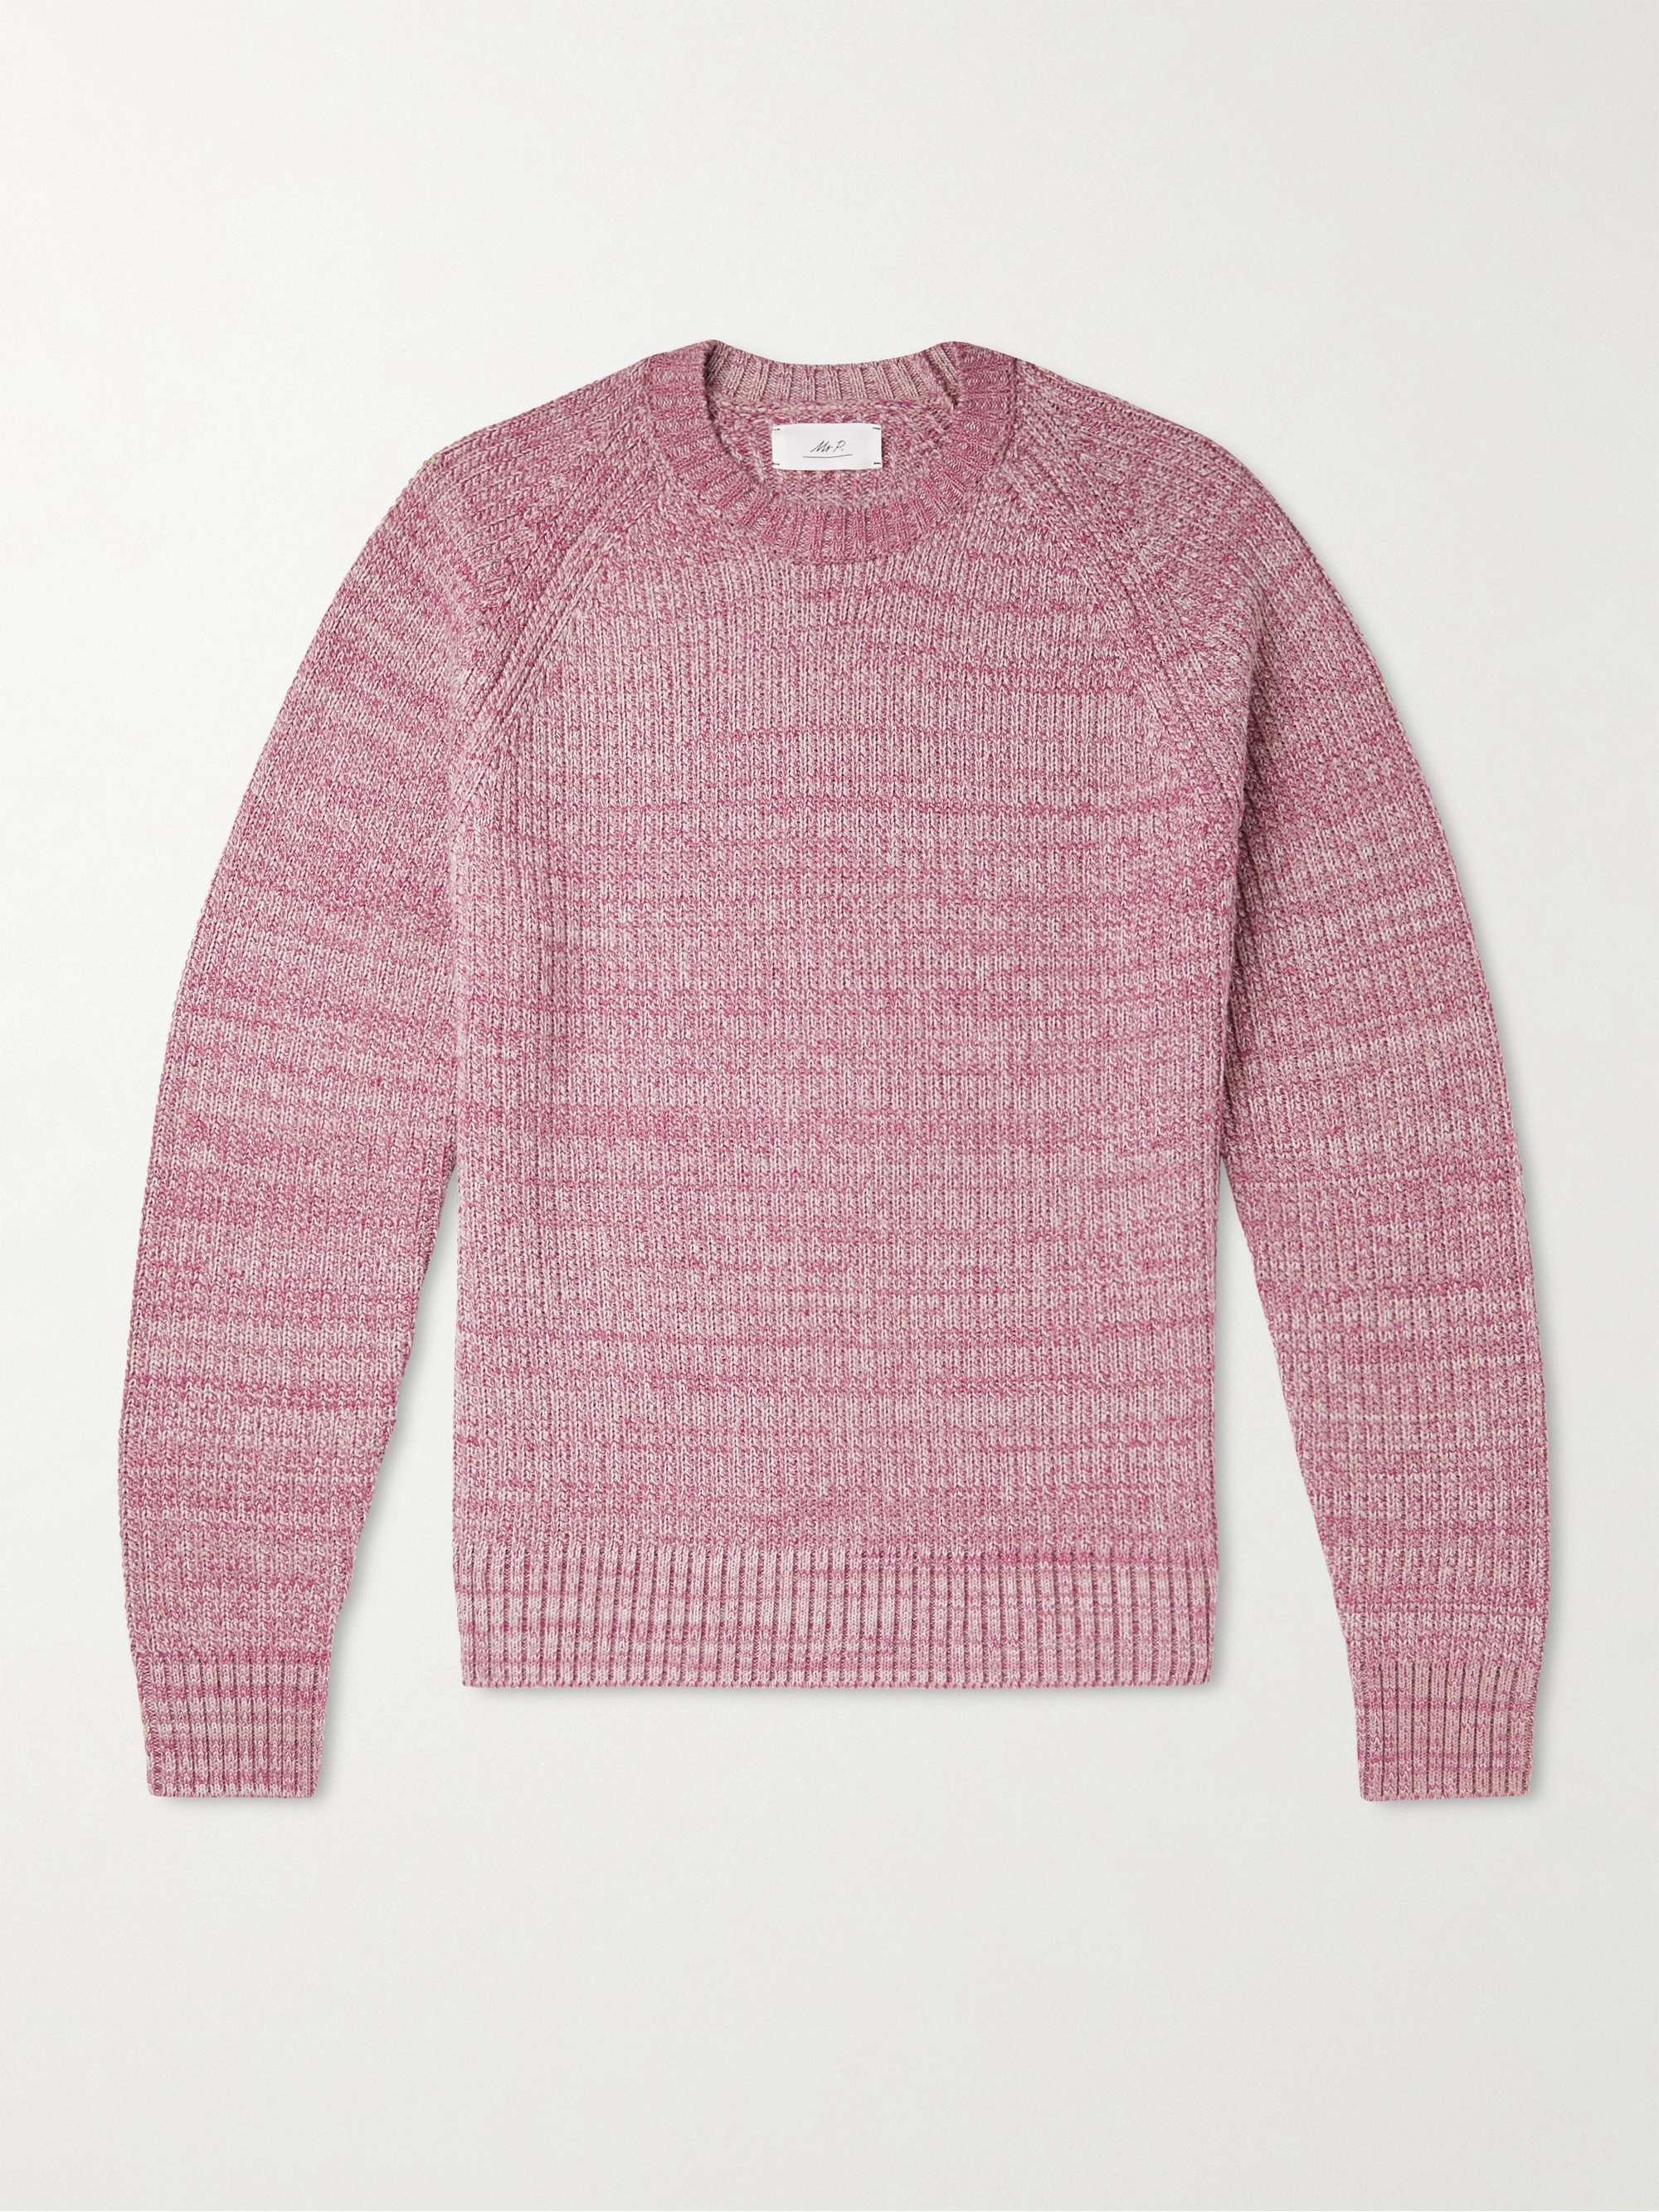 MR P. Twisted-Yarn Cotton and Wool-Blend Sweater for Men | MR PORTER